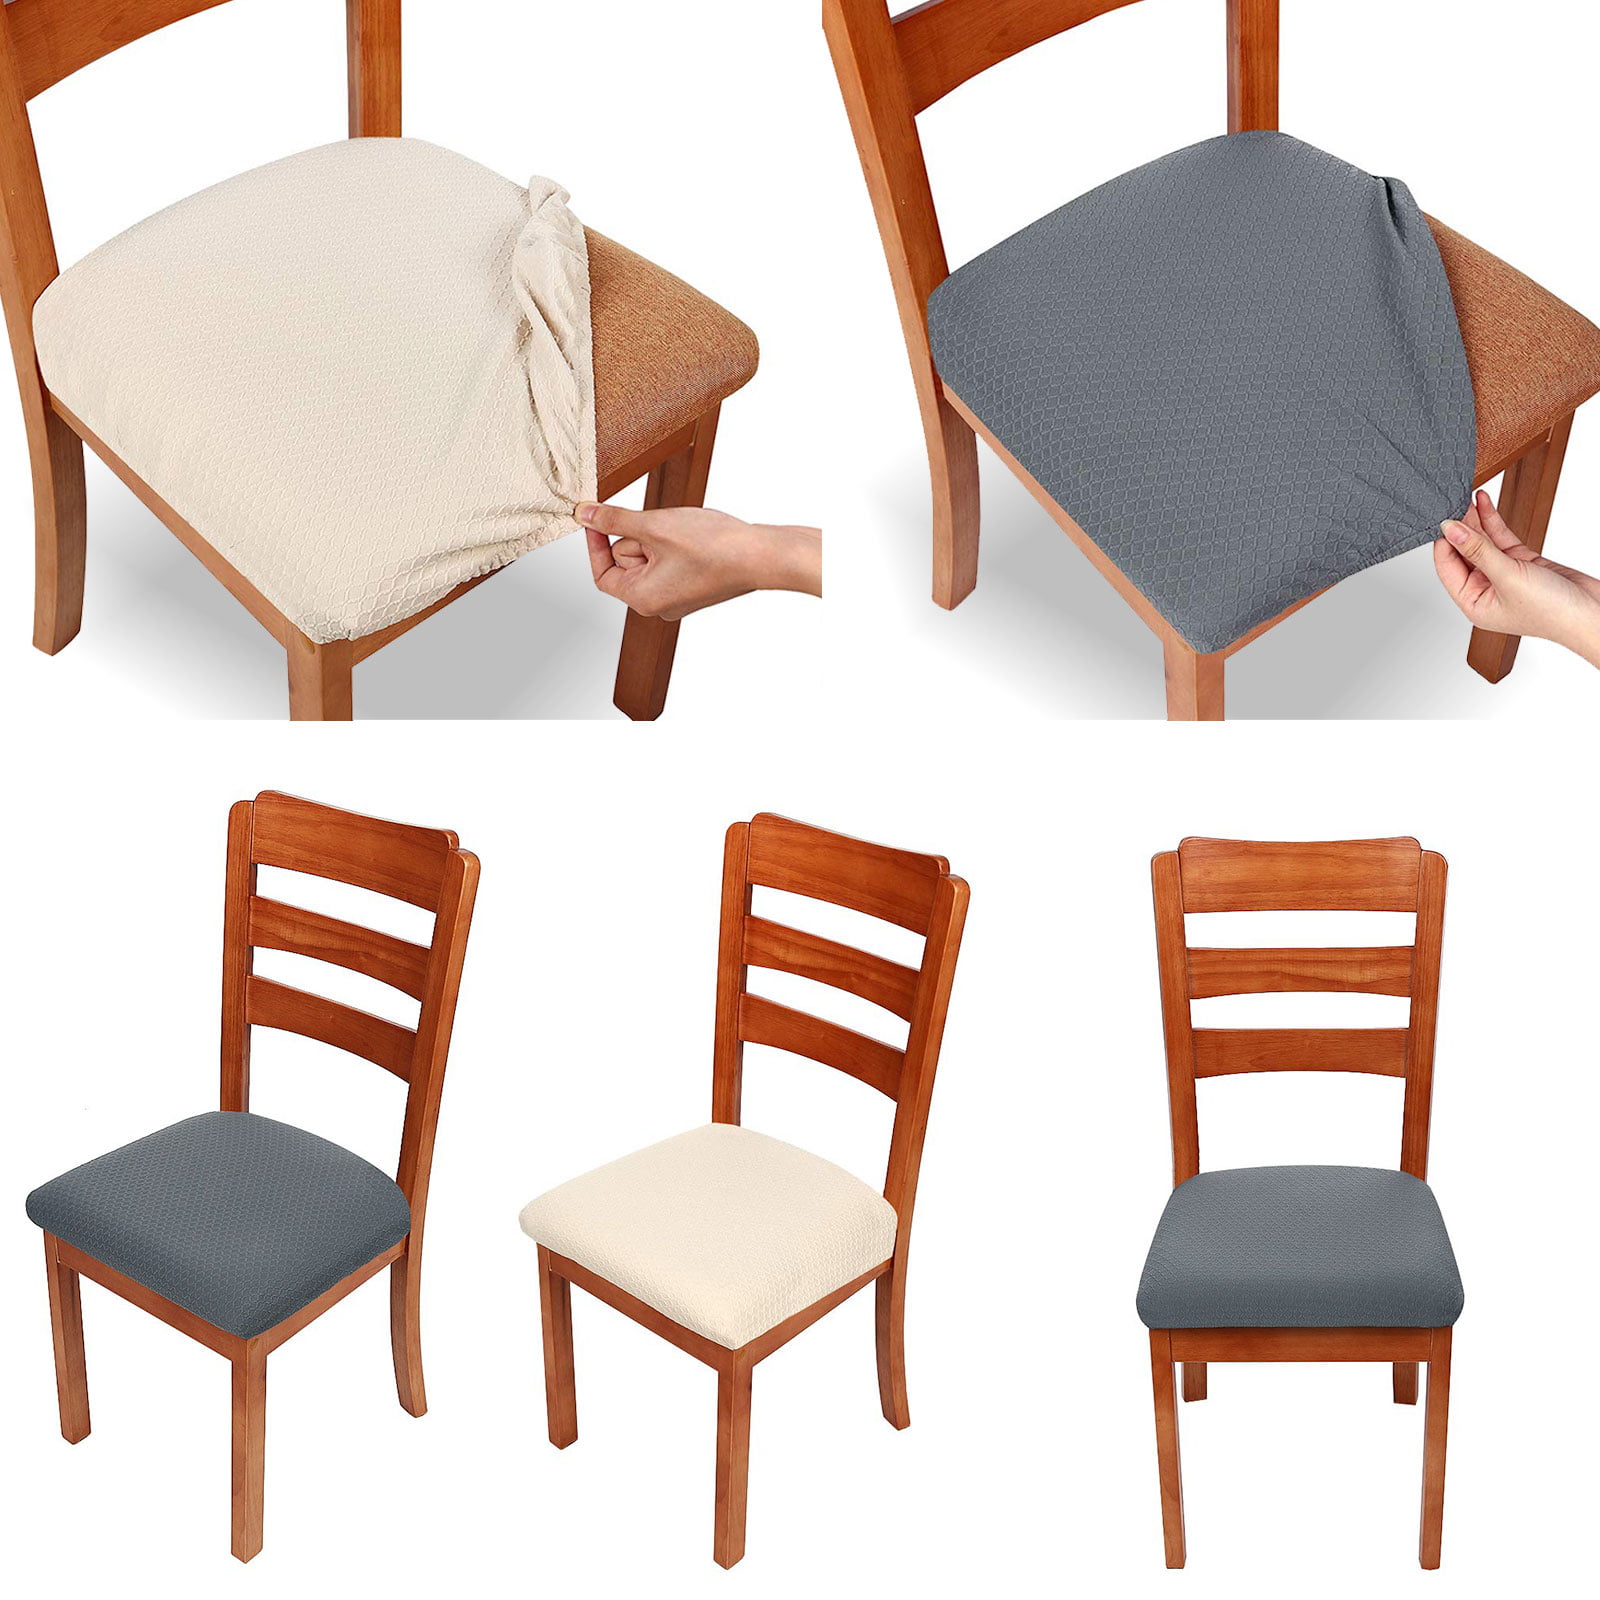 washable seat covers for dining room chairs